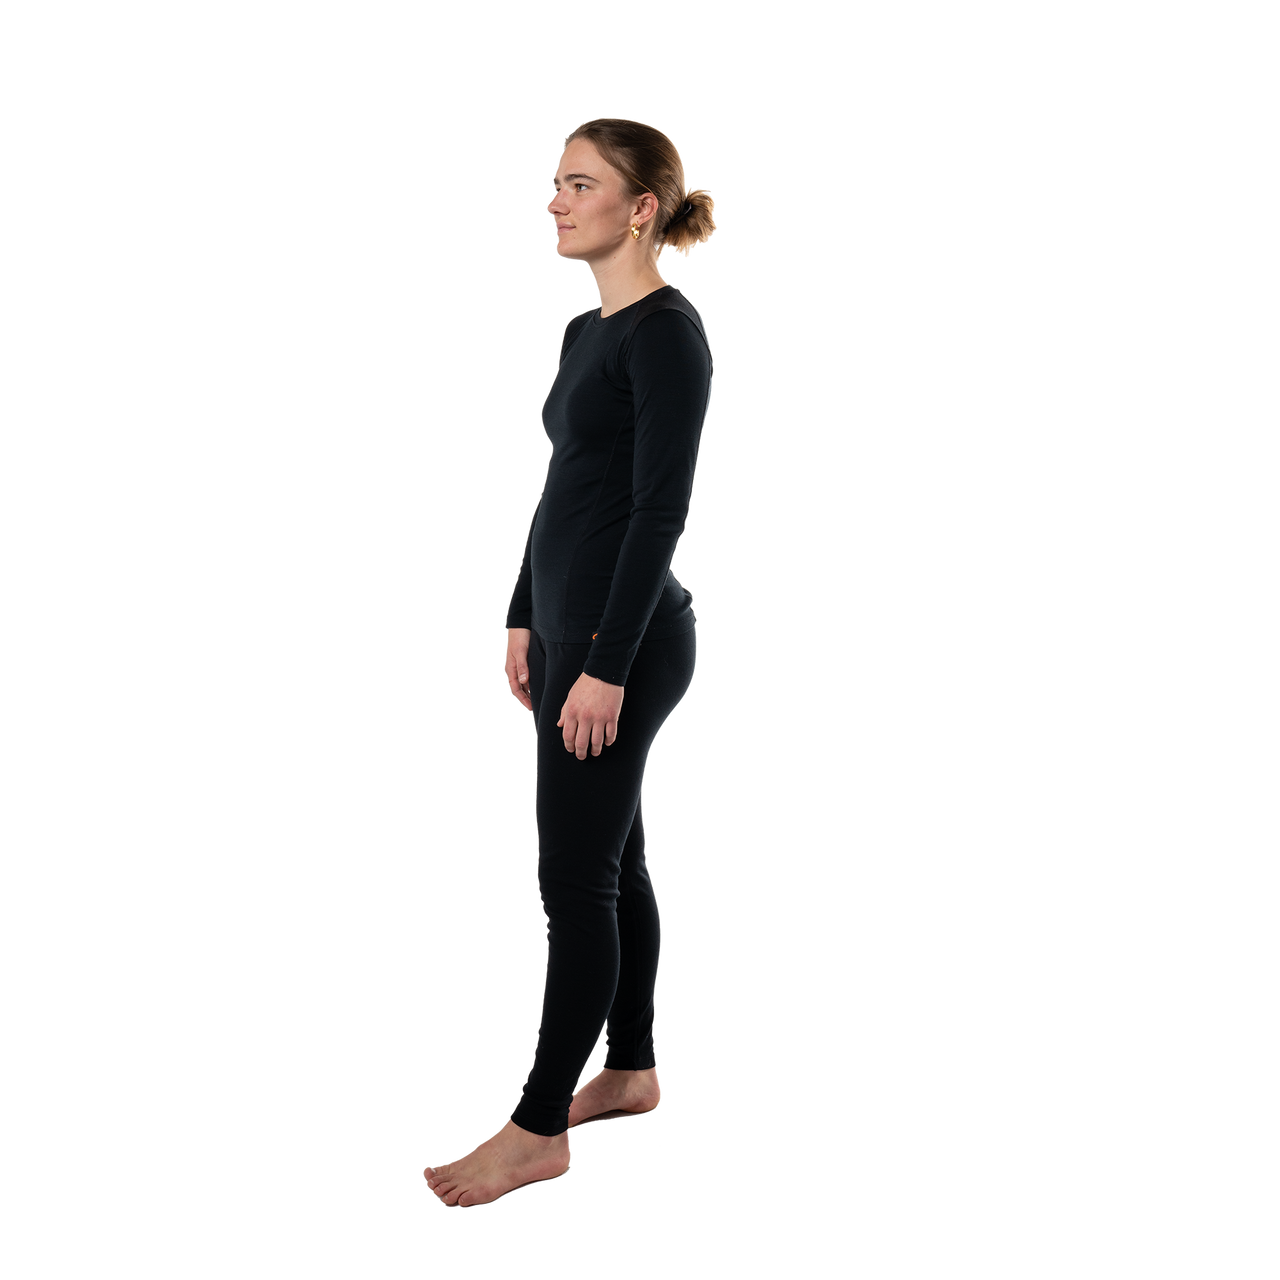 Women's Base Layer Long Sleeve Mid-Weight Crew Neck Top